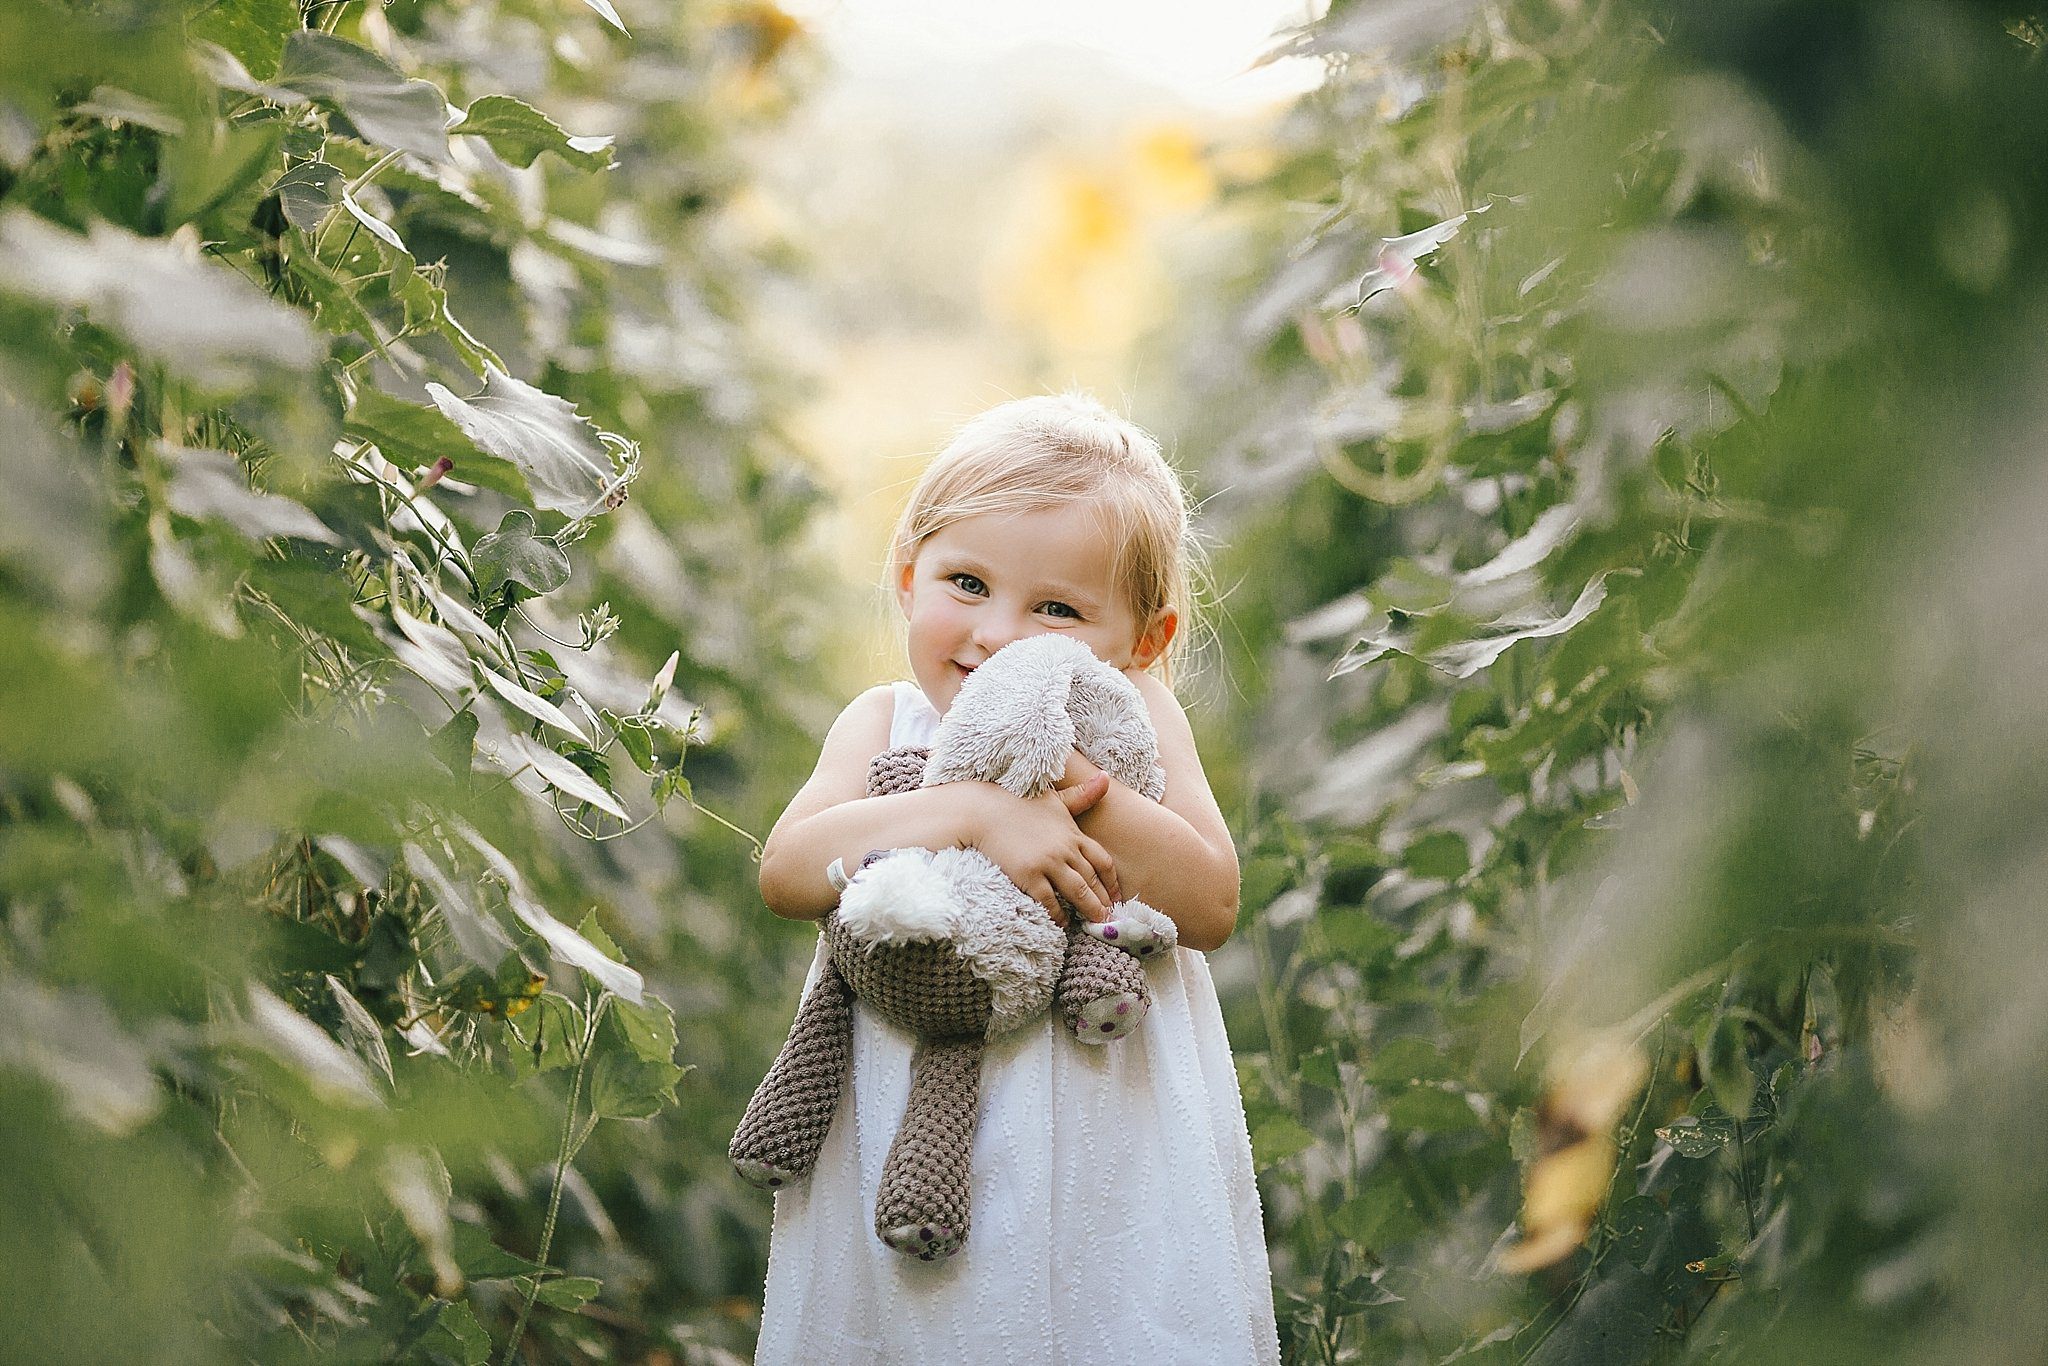 Sunflower Fields in Knoxville | Erin Morrison Photography www.erinmorrisonphotography.com